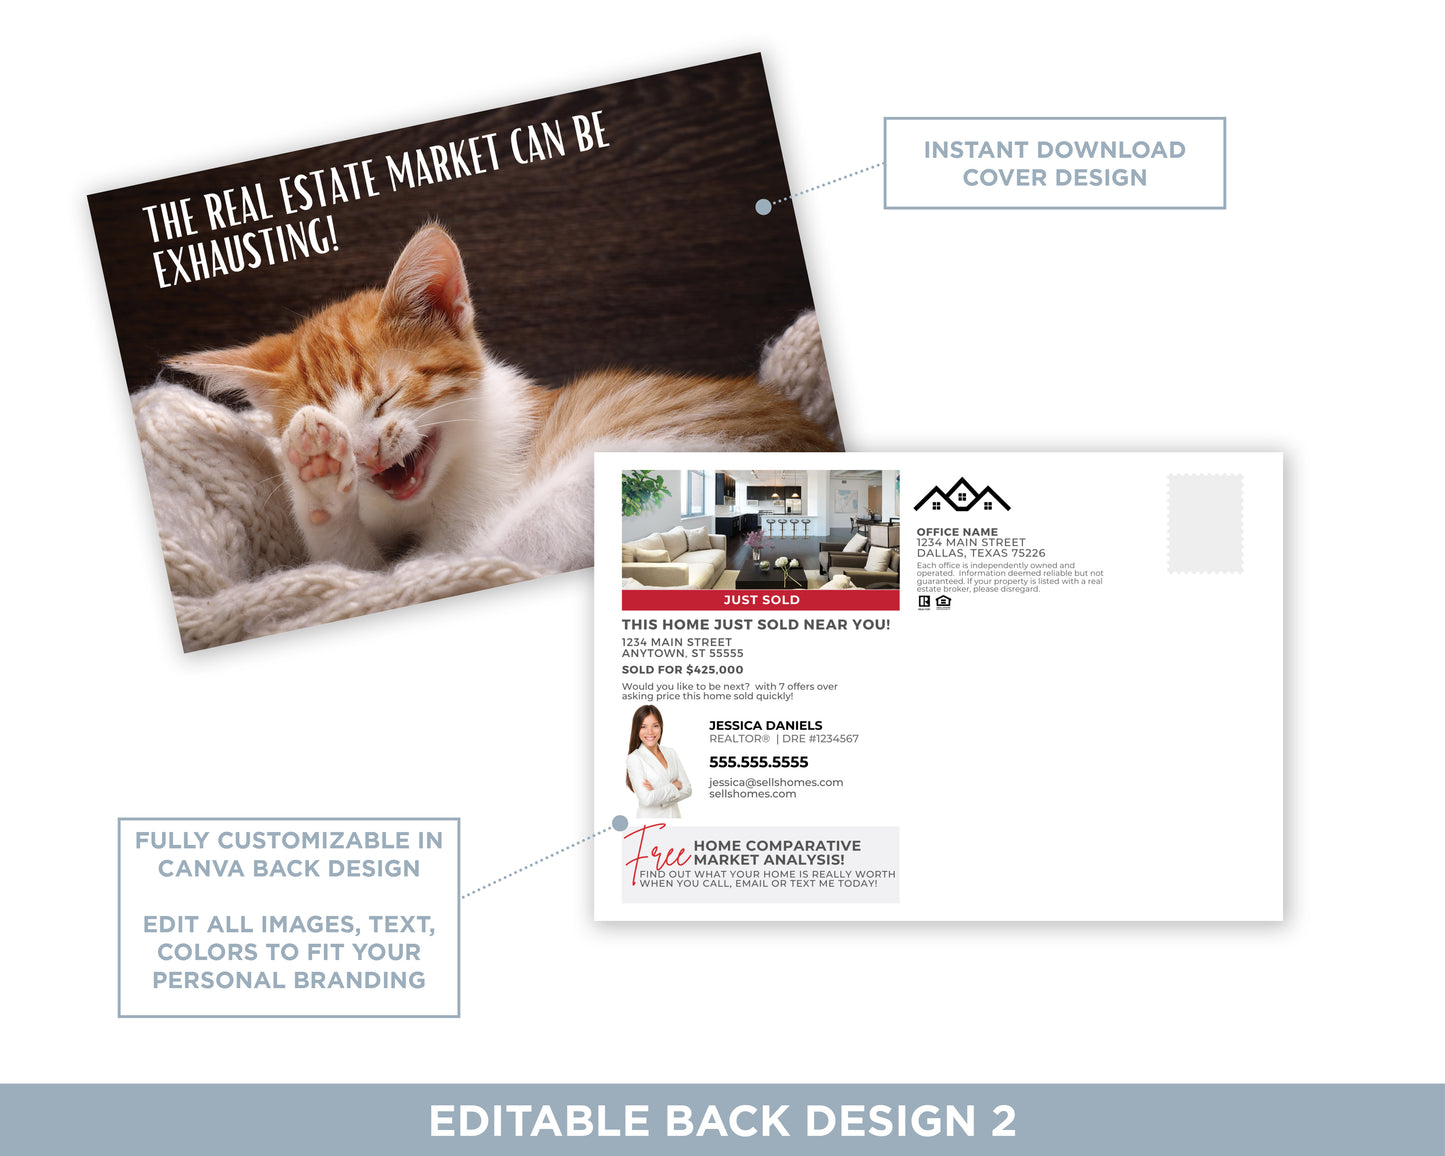 The Real Estate Market Can Be Exhausting | Funny Real Estate Postcard Download